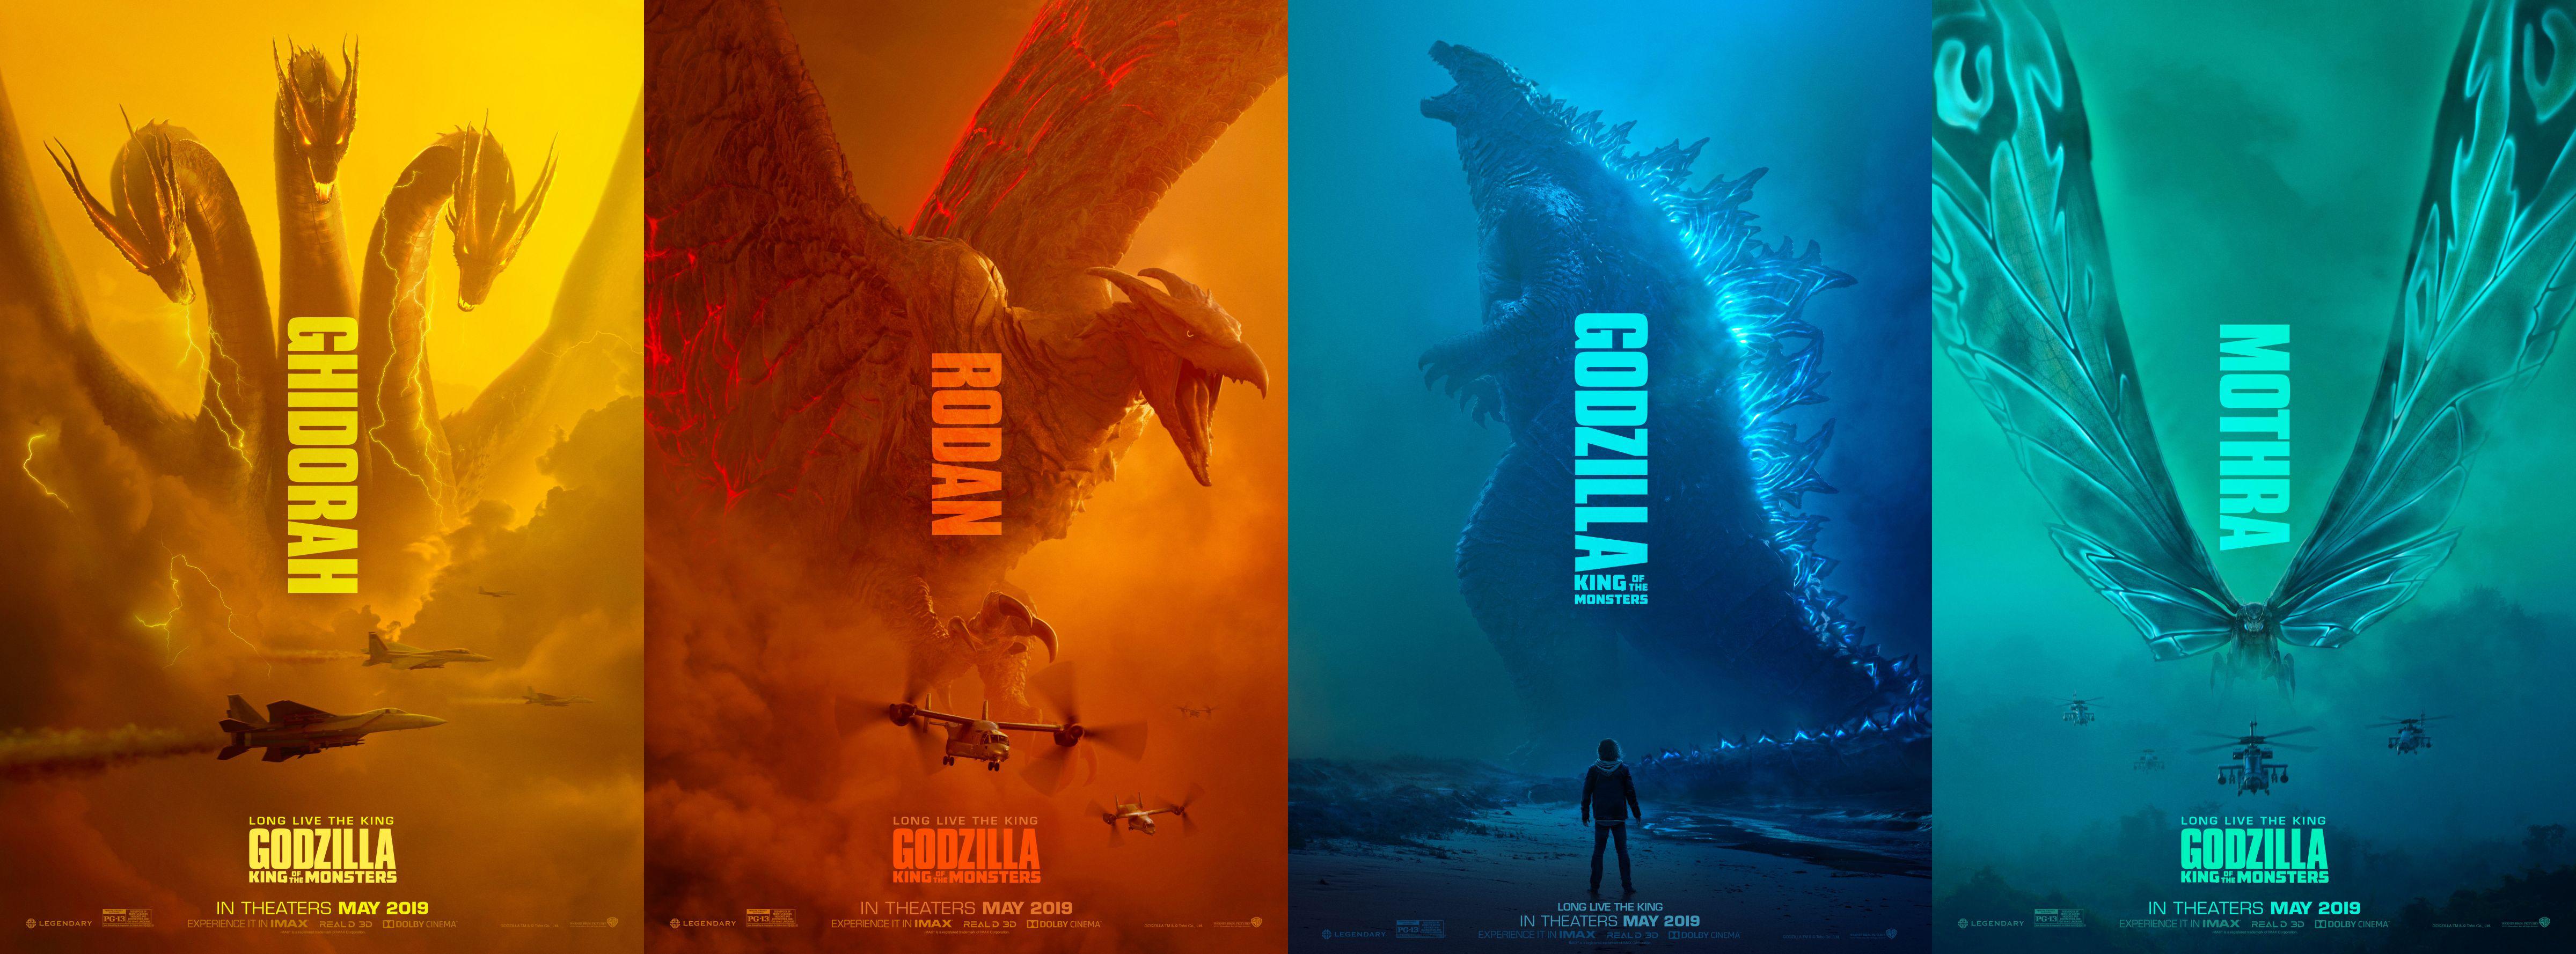 Godzilla King Of The Monsters Monsters - HD Wallpaper 